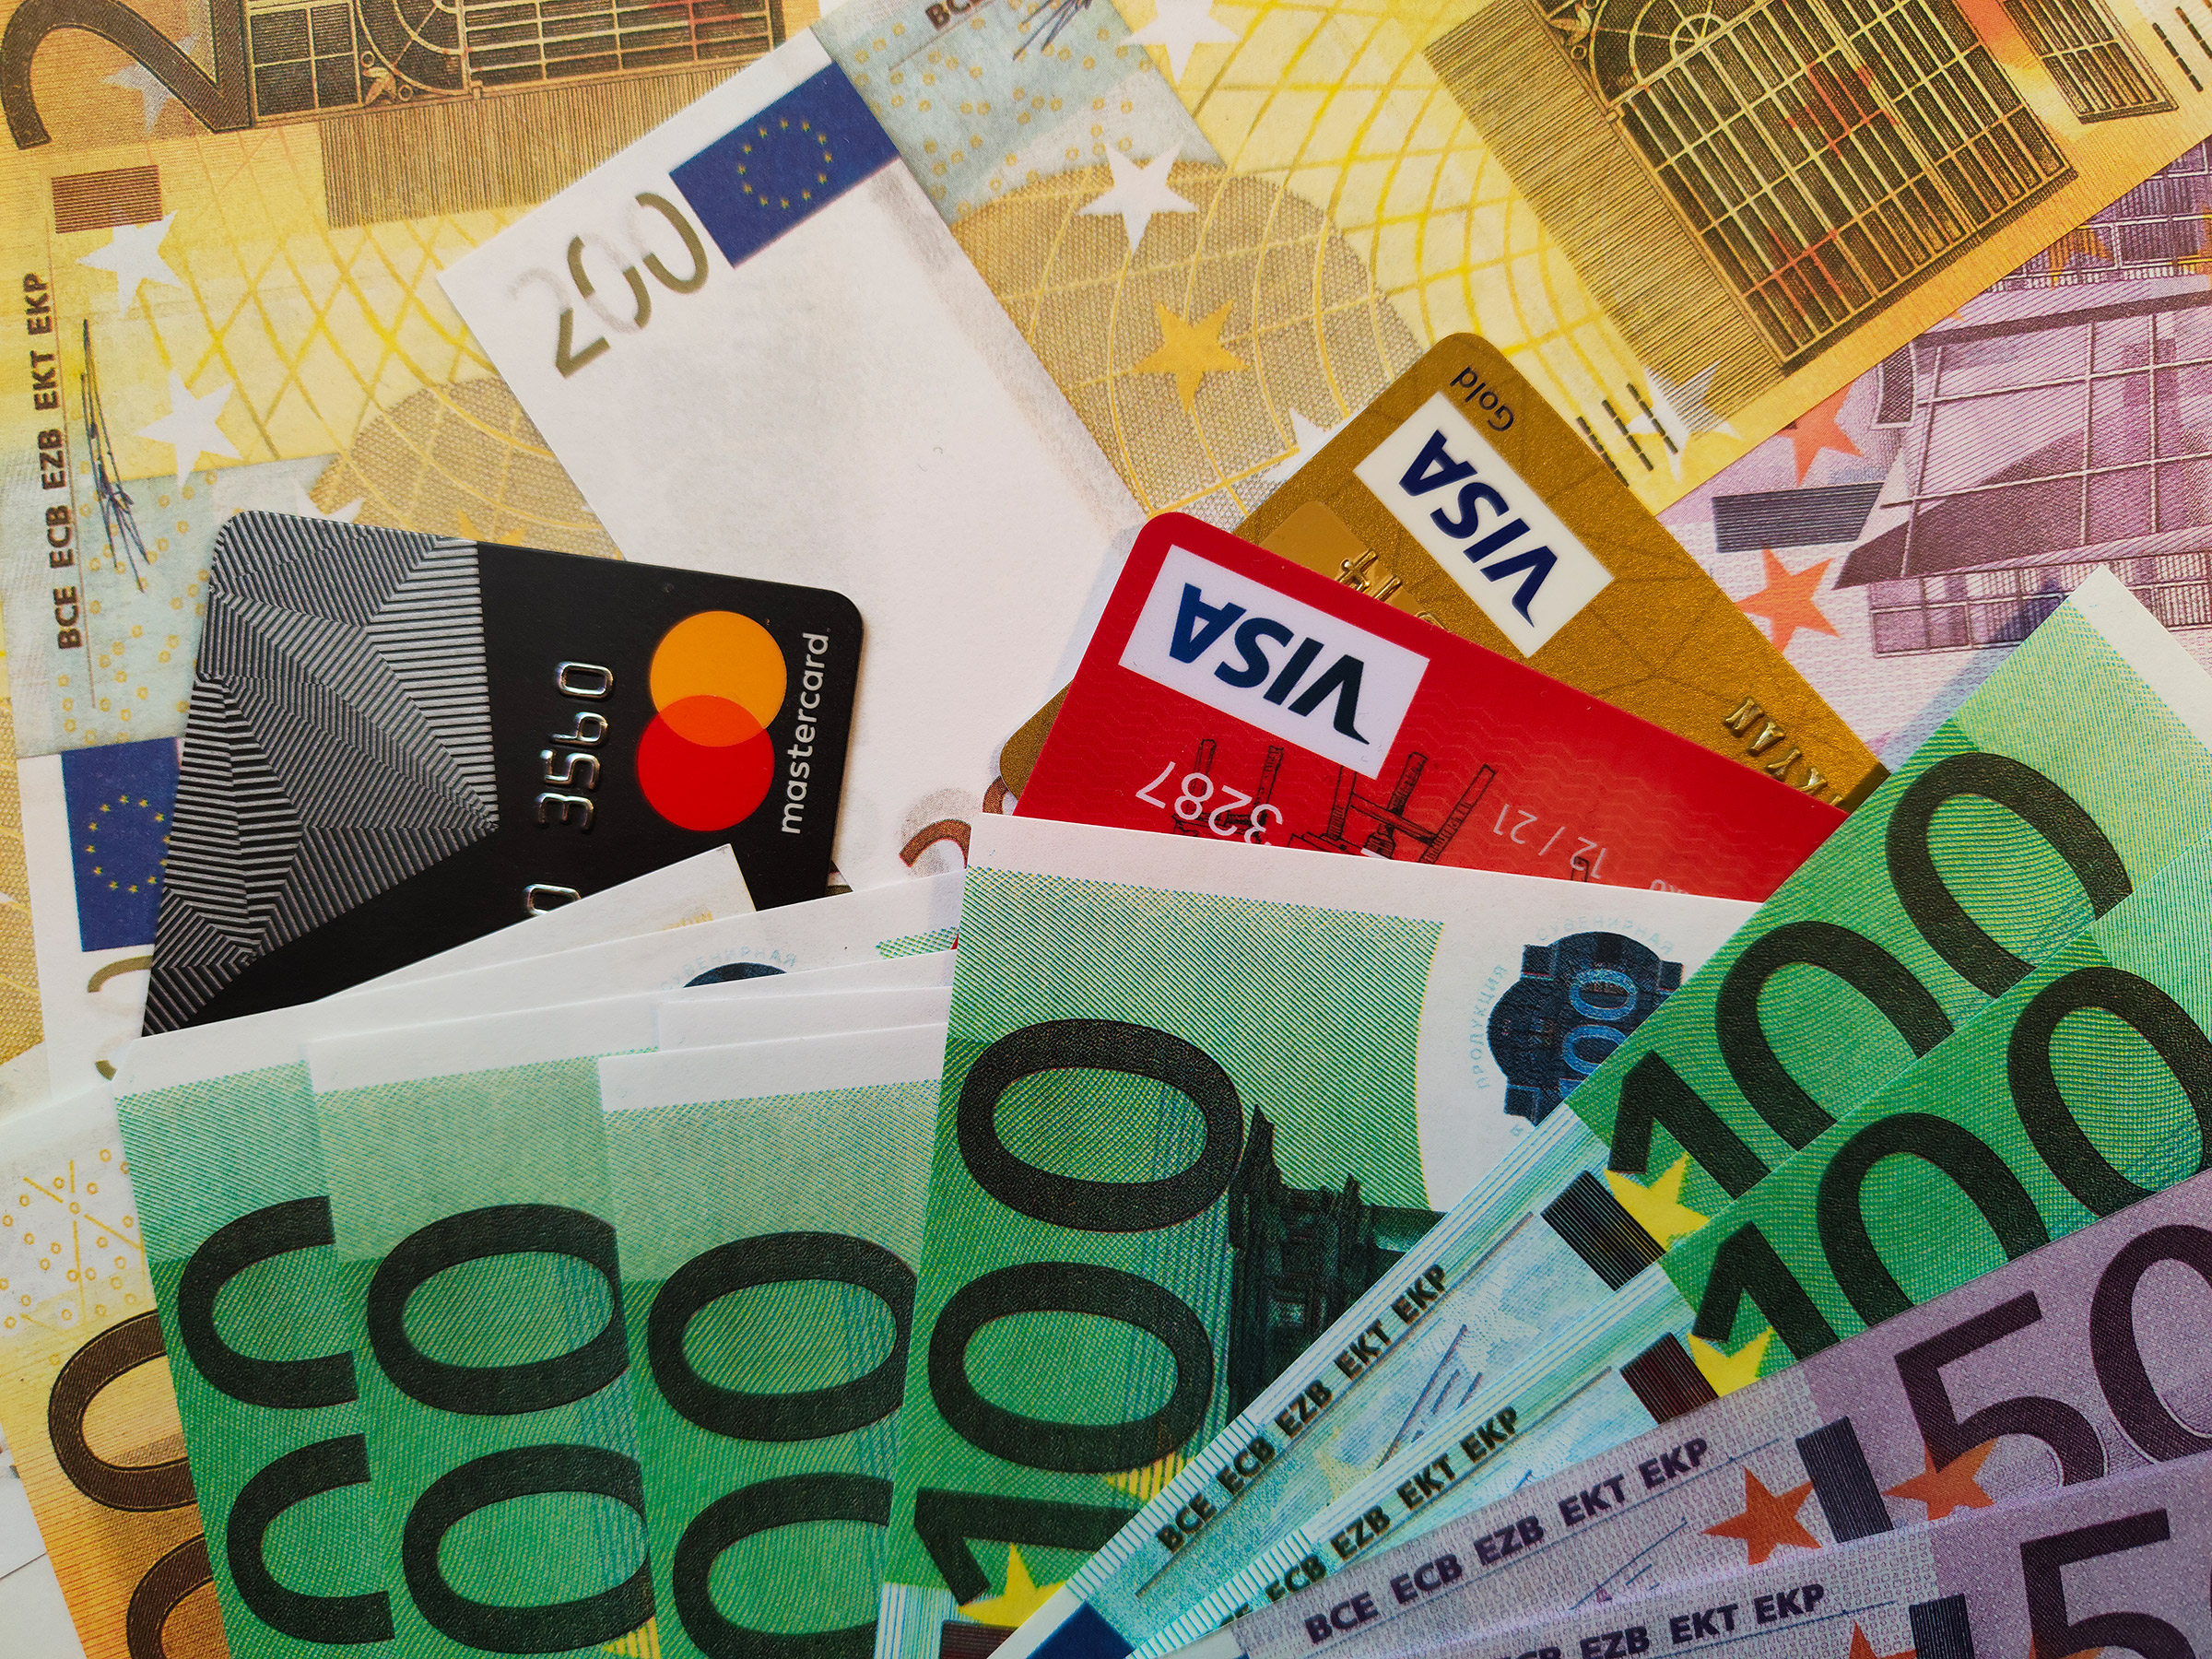 Free stock photo for editorial use: Euro paper banknotes and credit cards